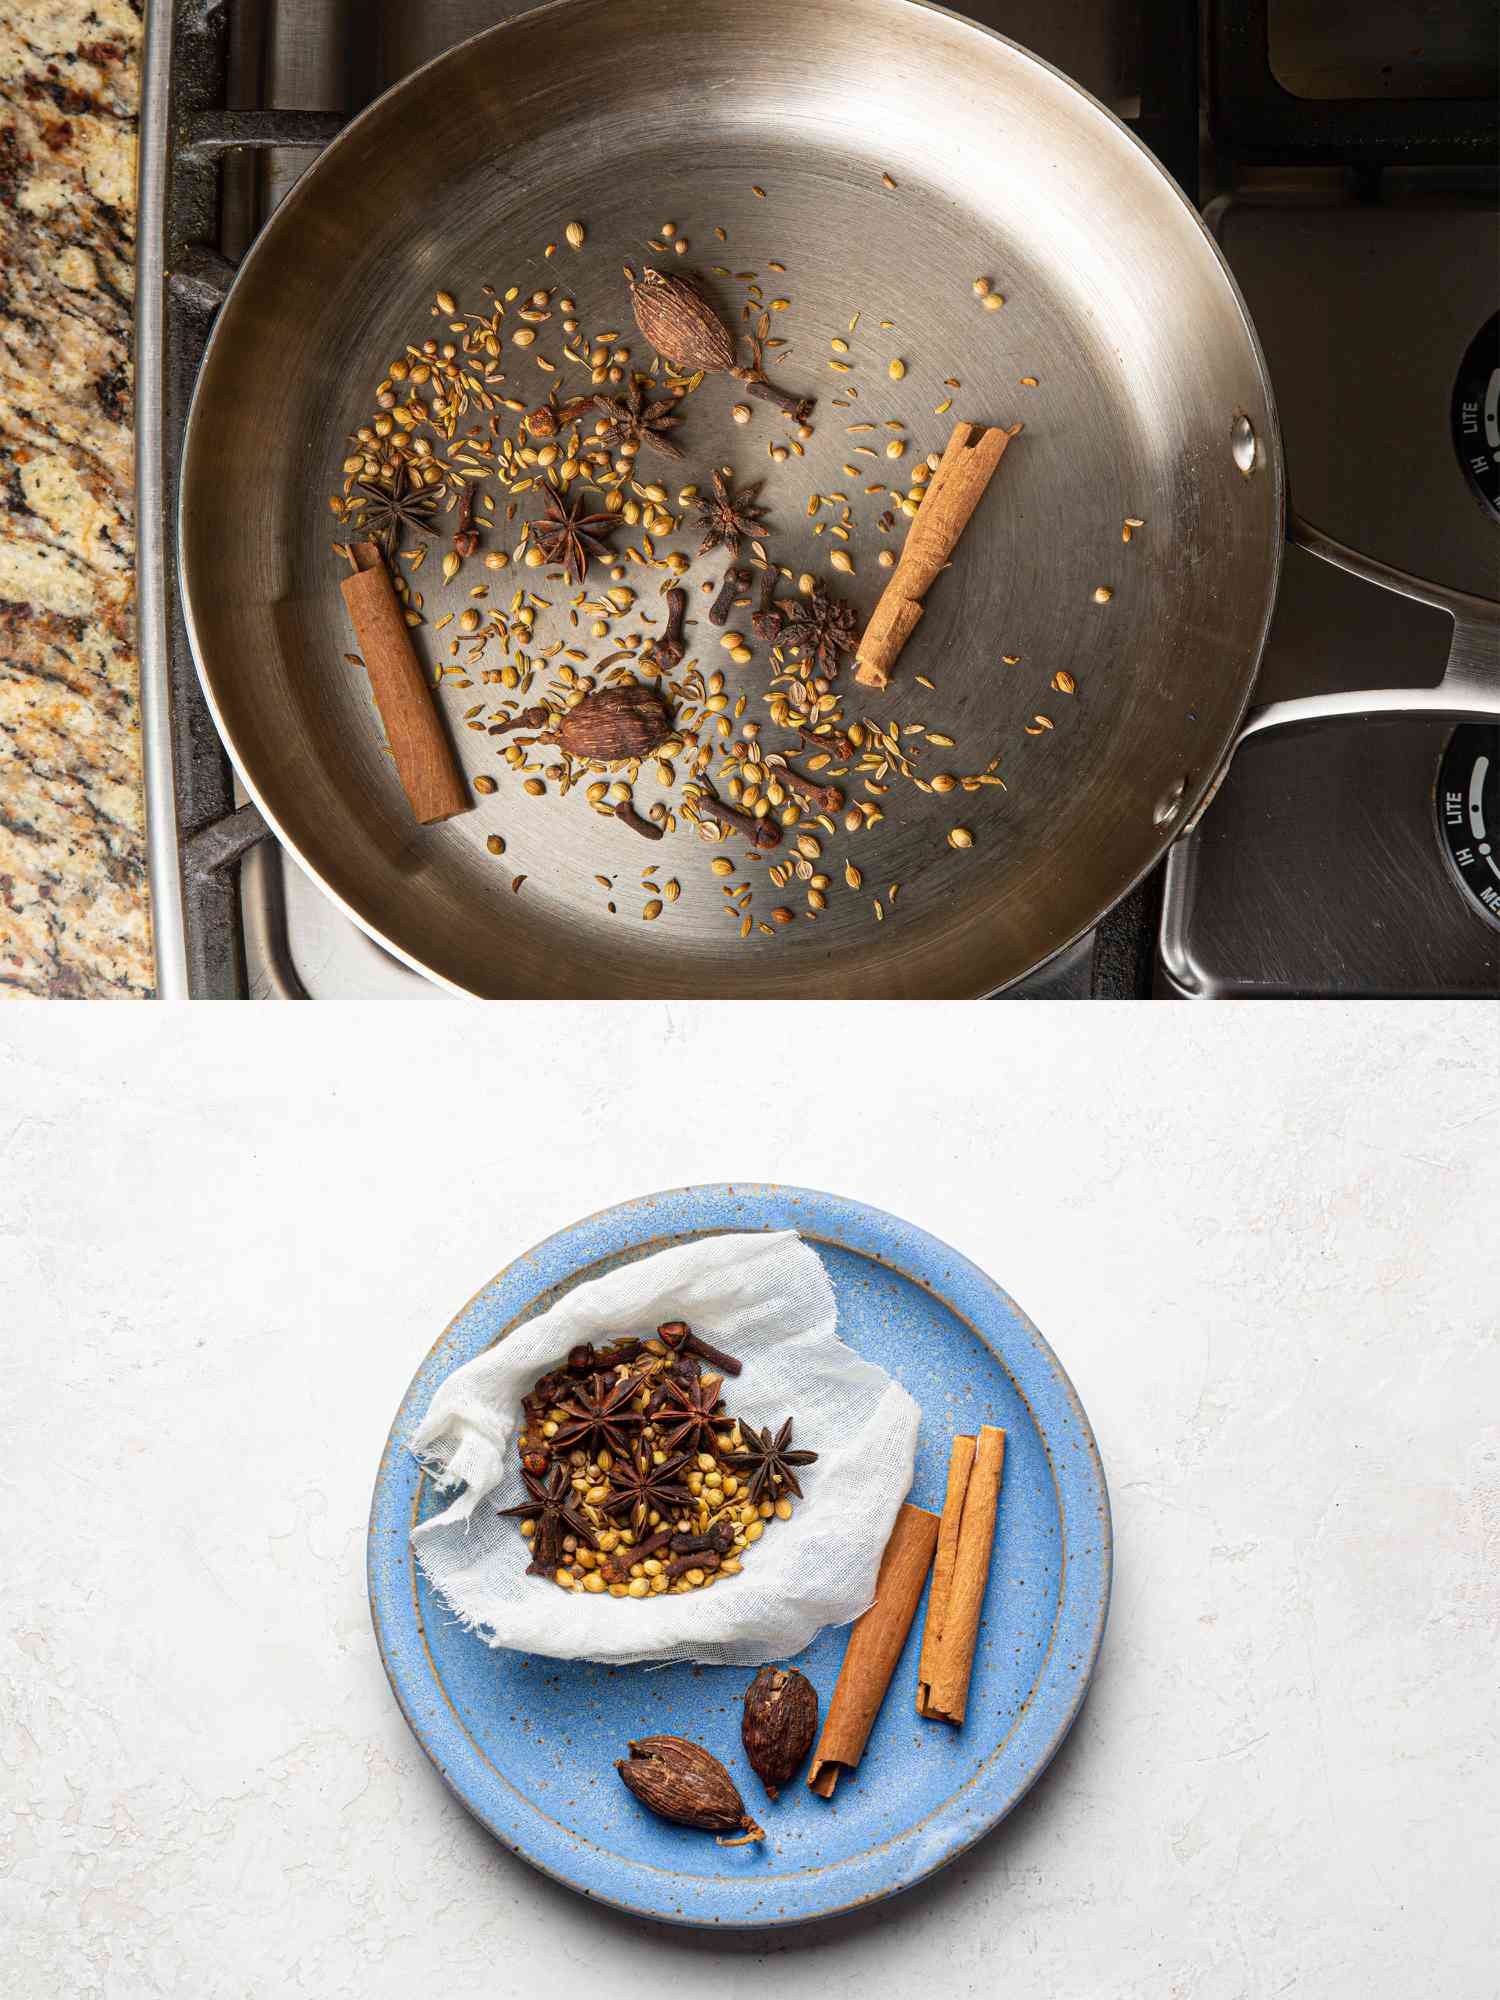 Two image collage of spices being tossed in a skillet and then wrapped in cheesecloth